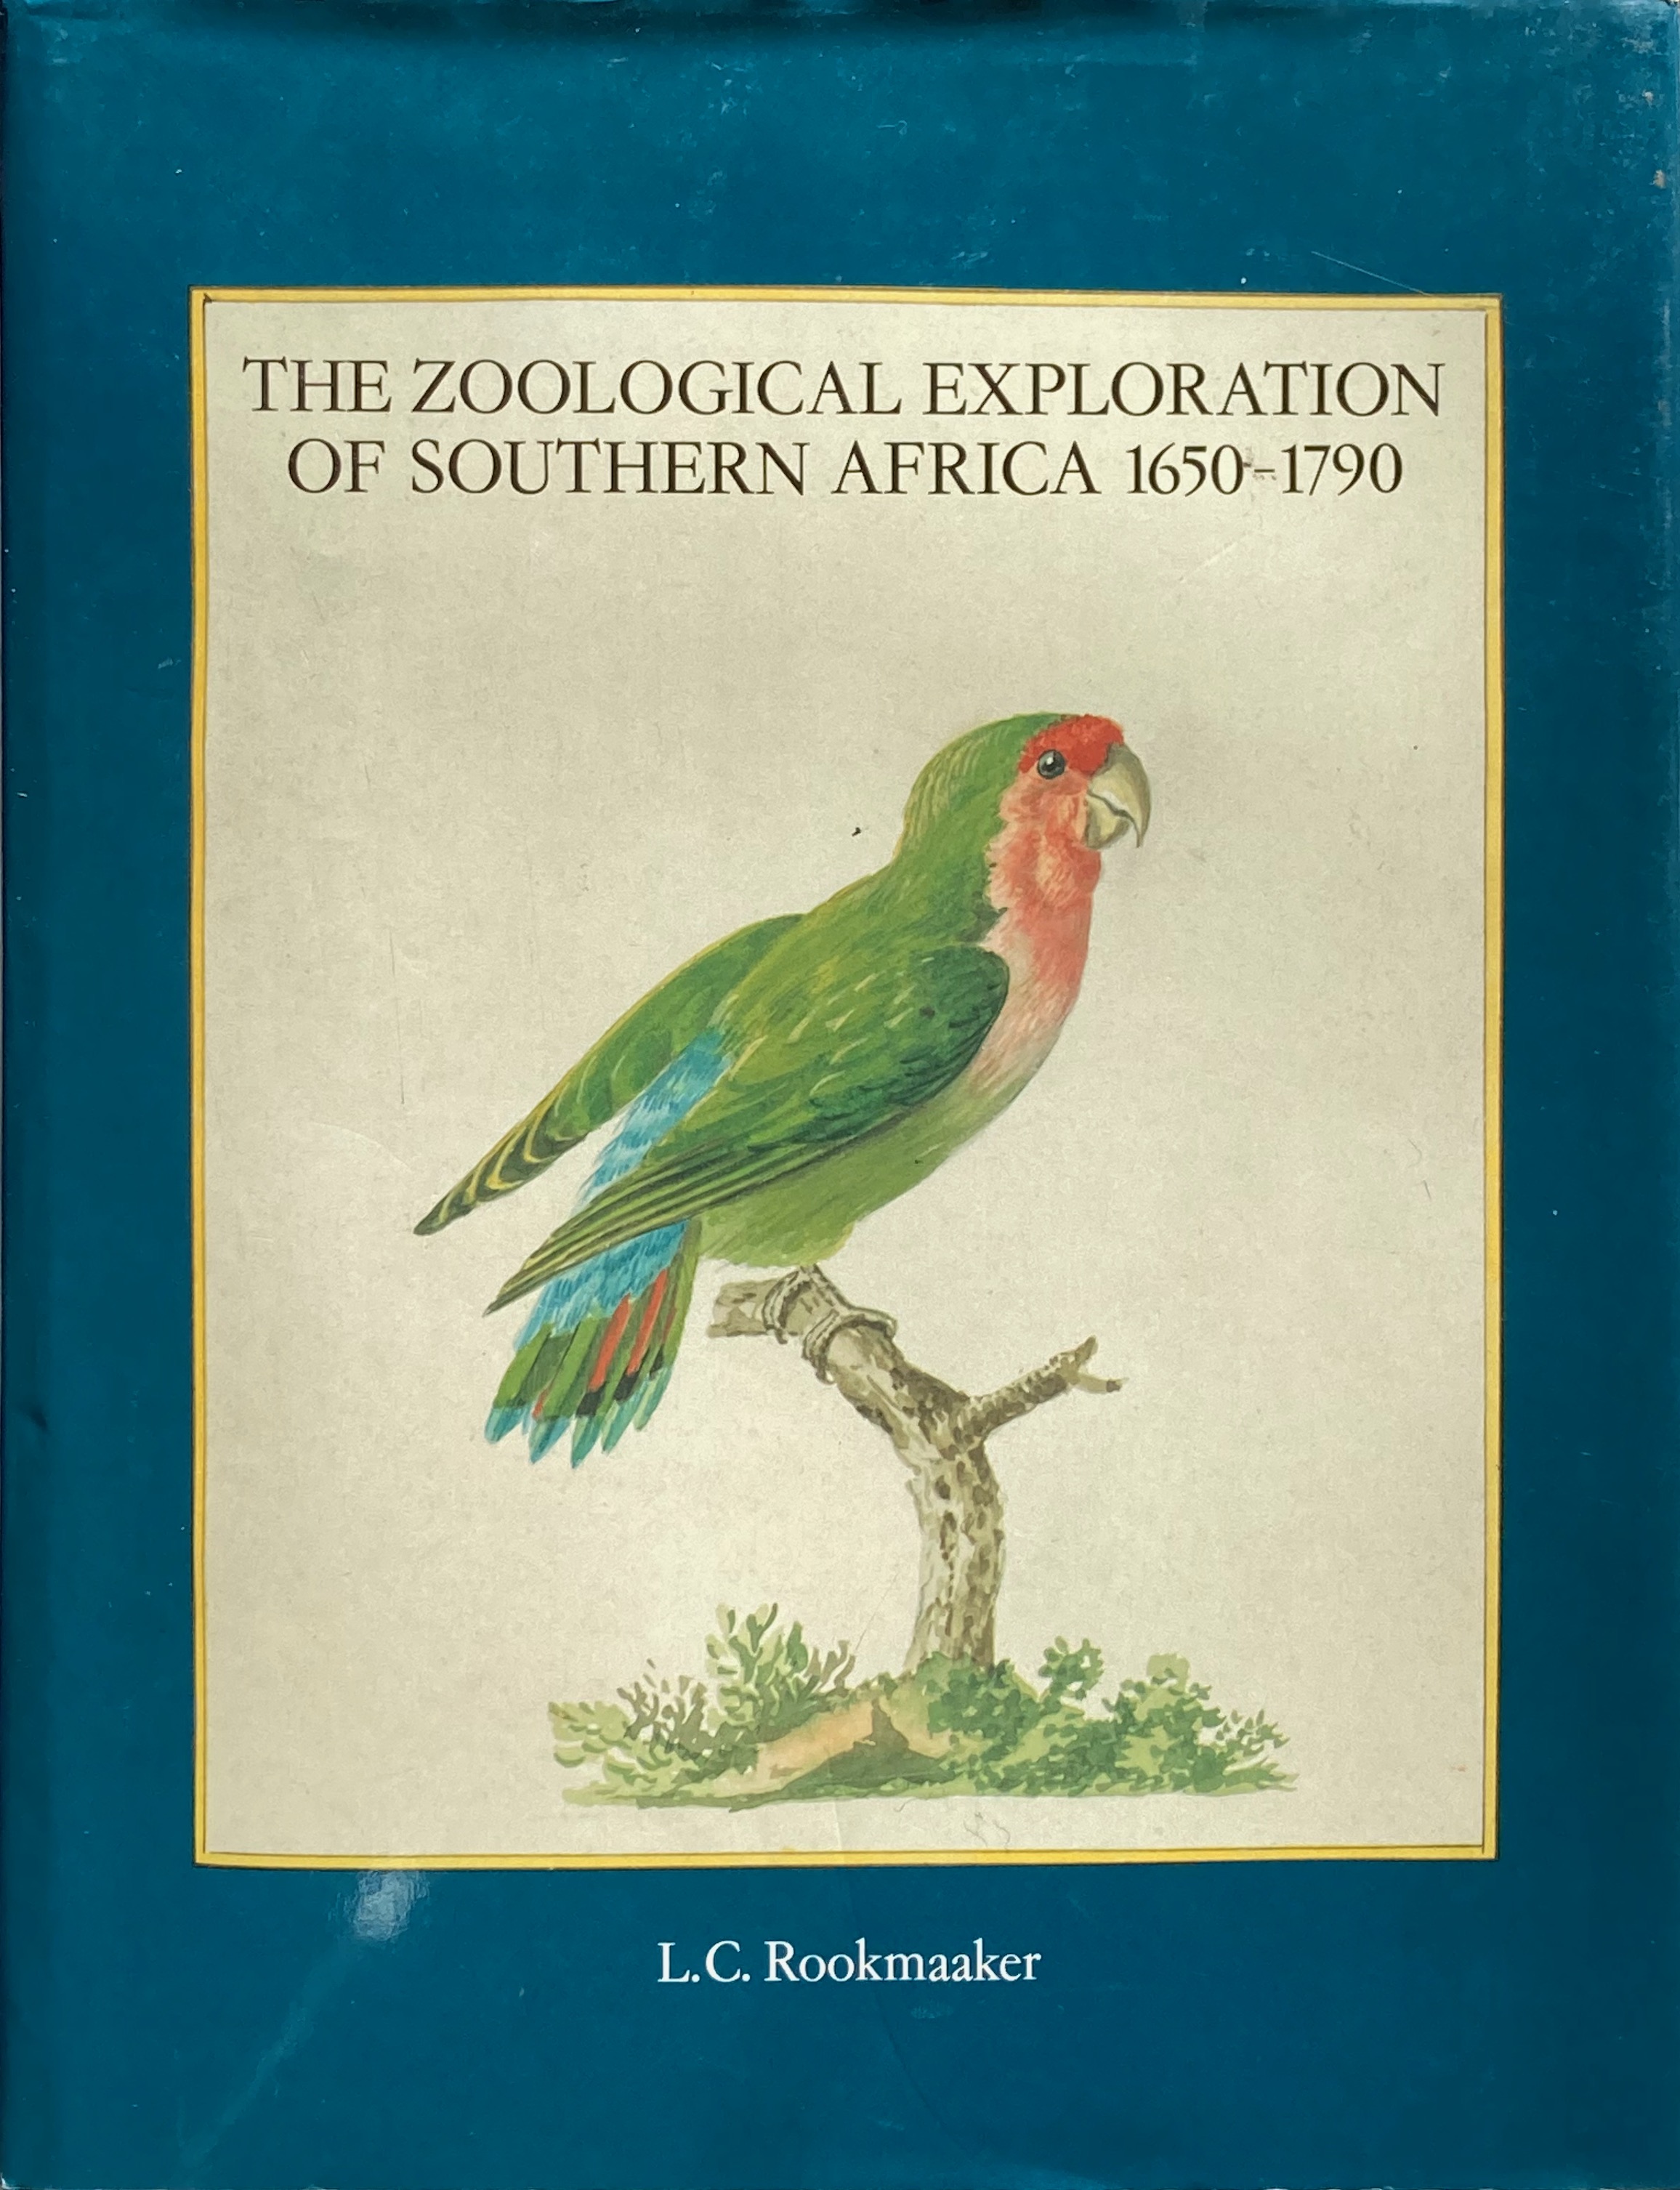 The zoological exploration of southern Africa 1650-1790 - Rookmaker, L.C.